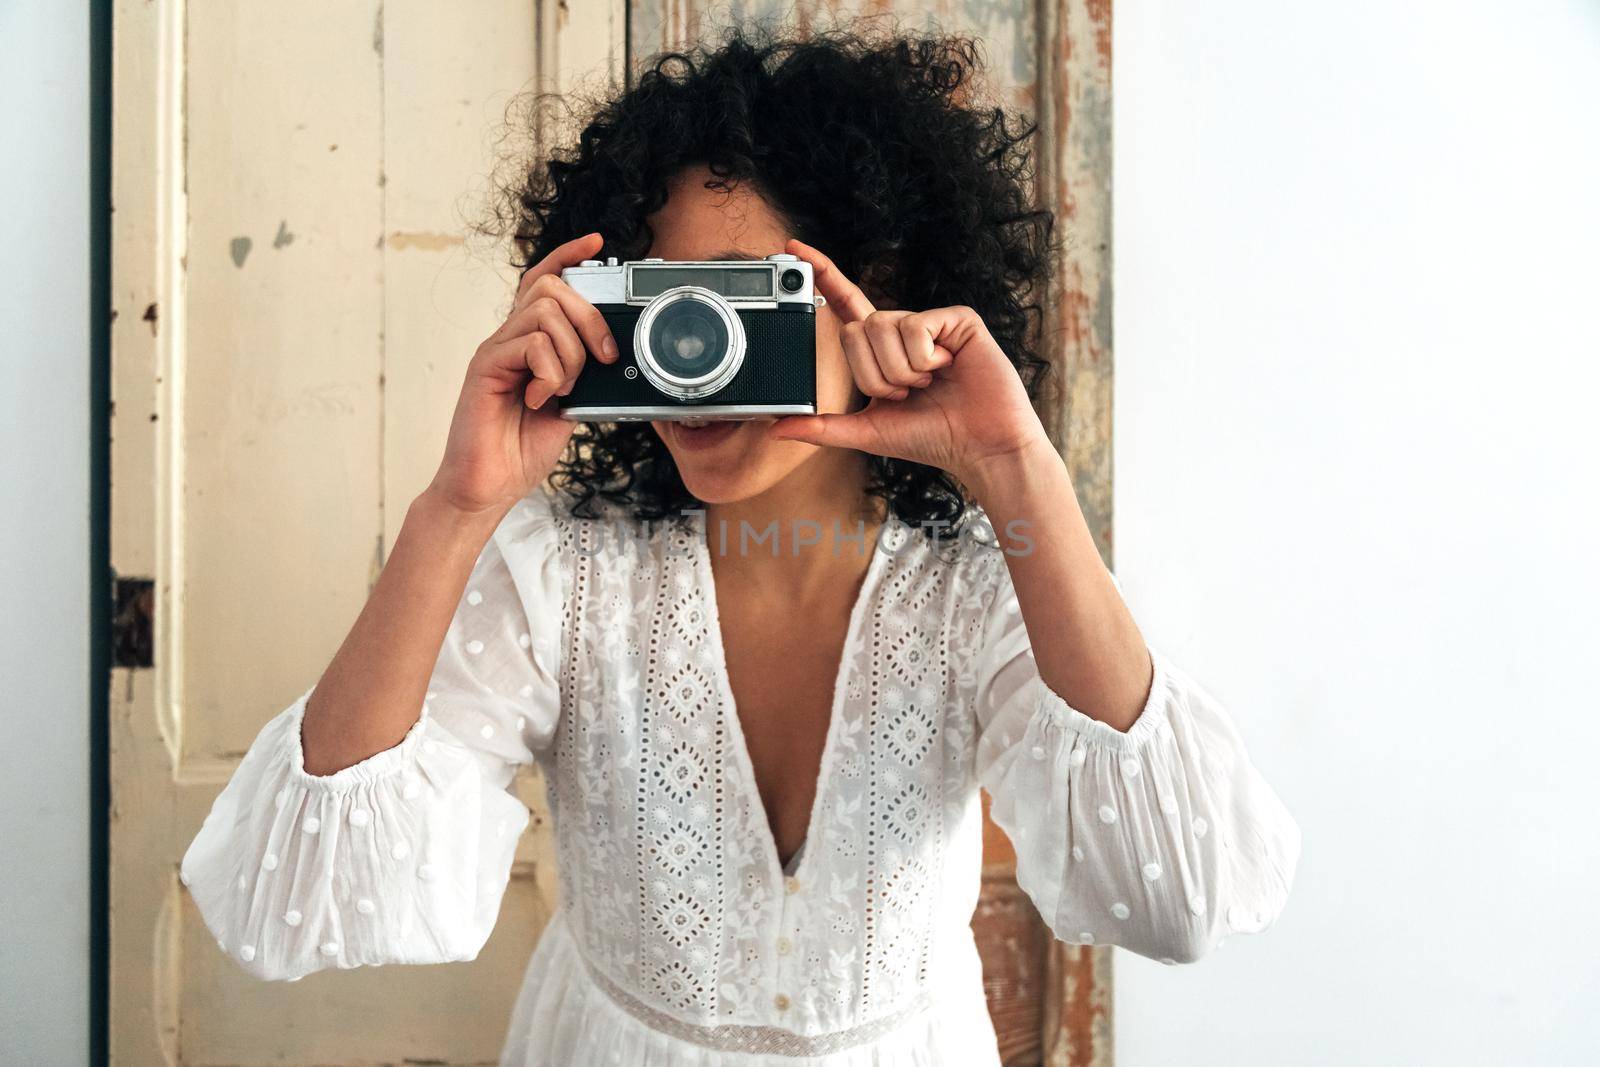 Young multiracial woman taking a picture with retro style analog camera. Vintage photography concept.